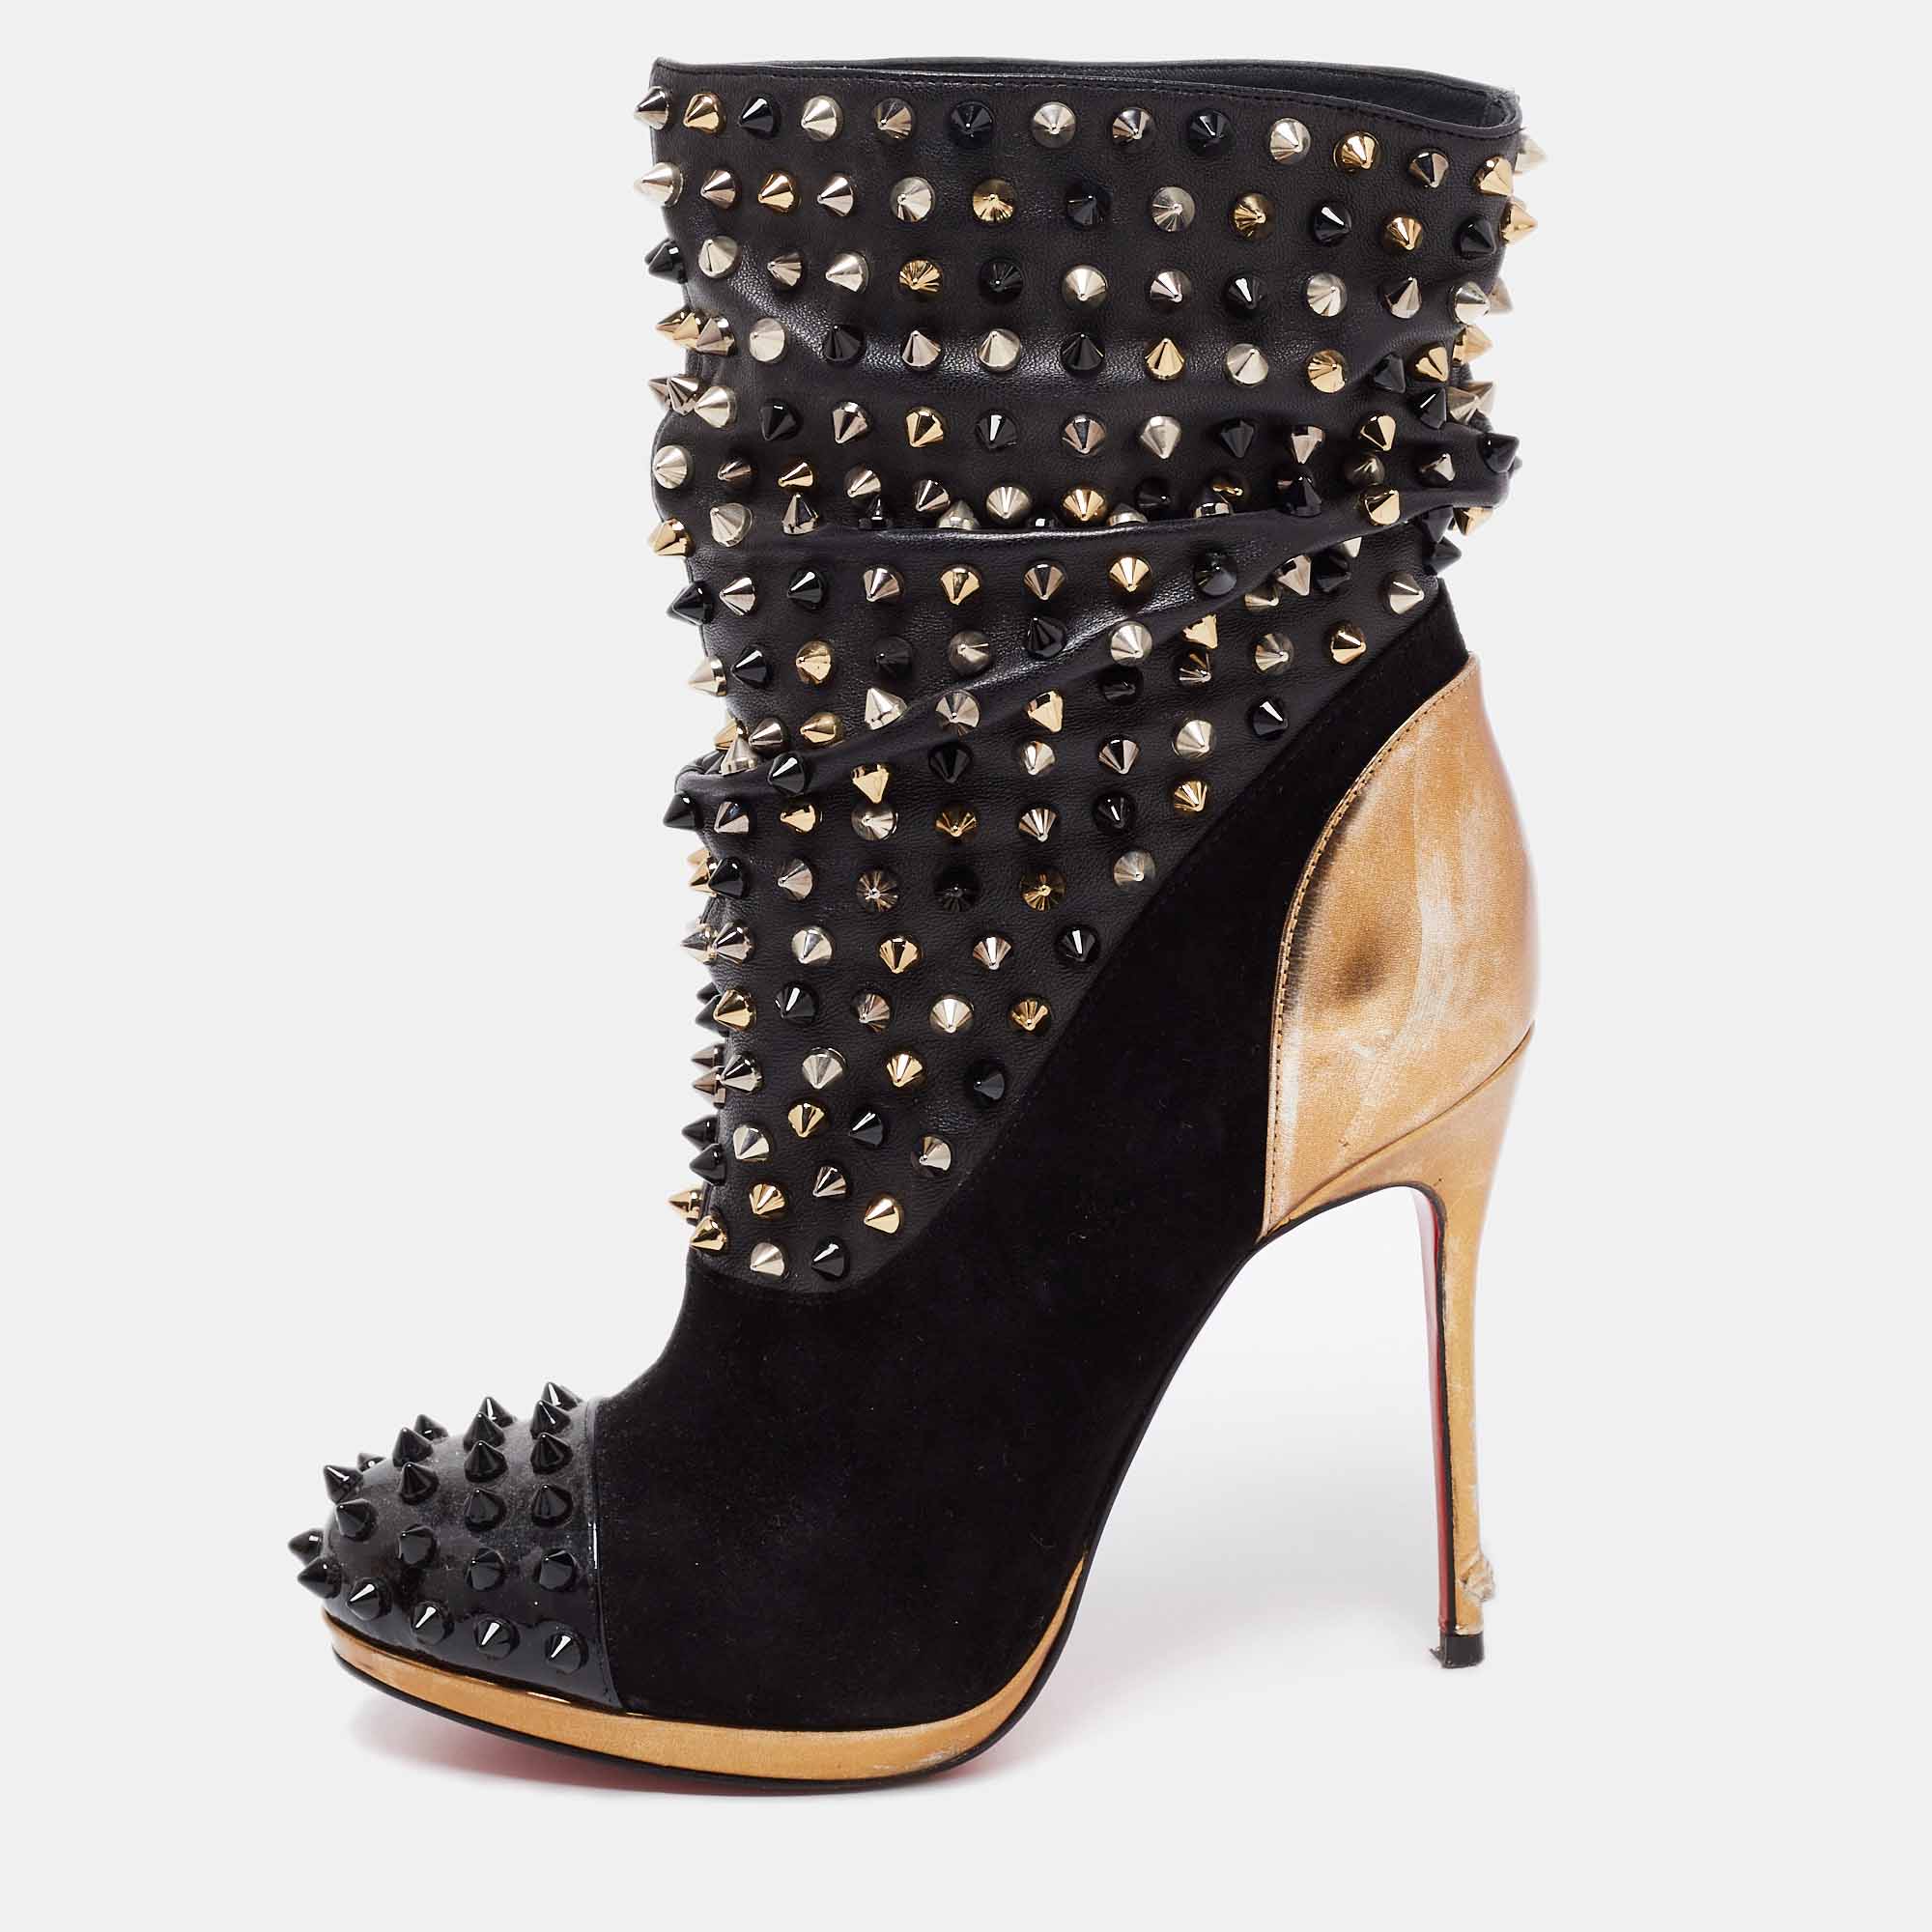 Christian louboutin black/gold suede, patent and leather spike wars ankle booties size 35.5